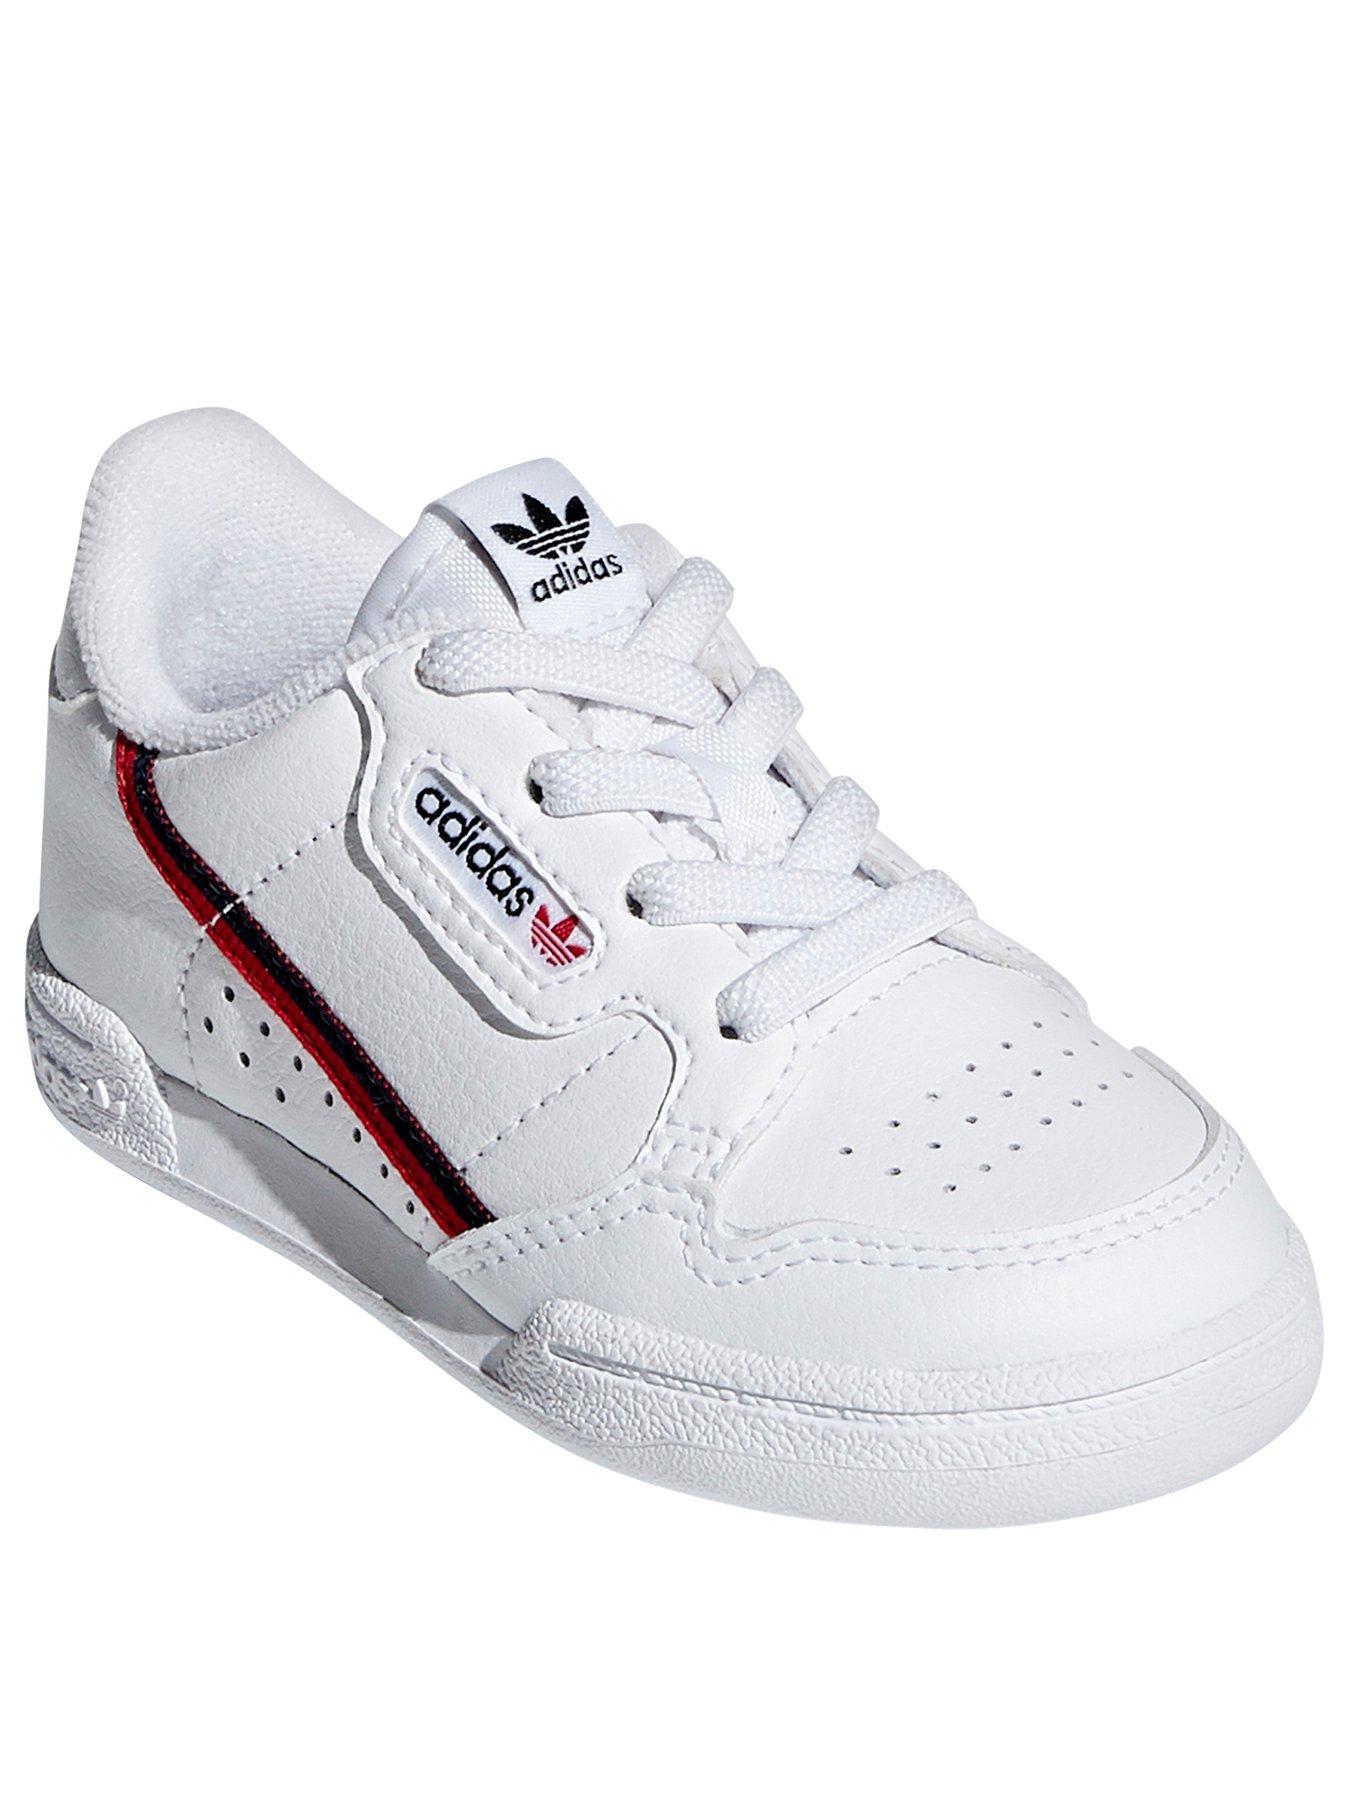 junior size 8 trainers